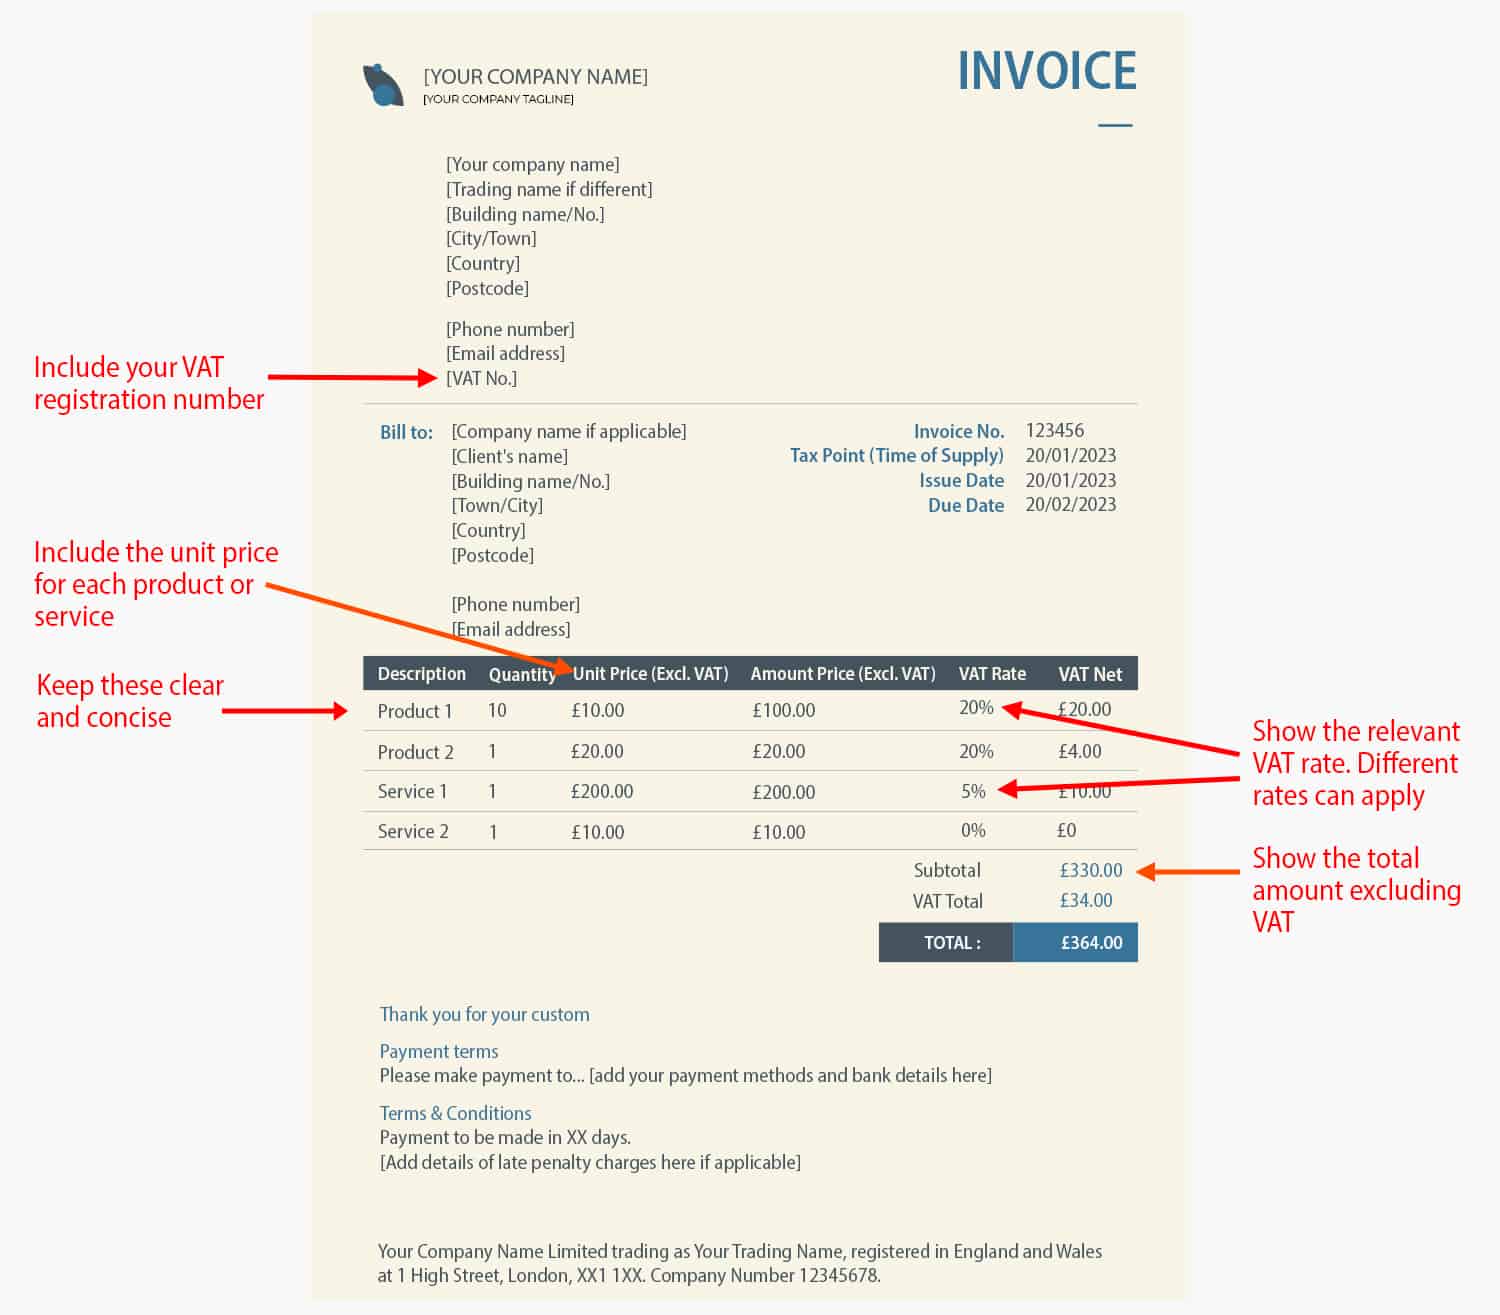 Image of an example VAT Invoice annotated in red text explaining the different parts of the document.